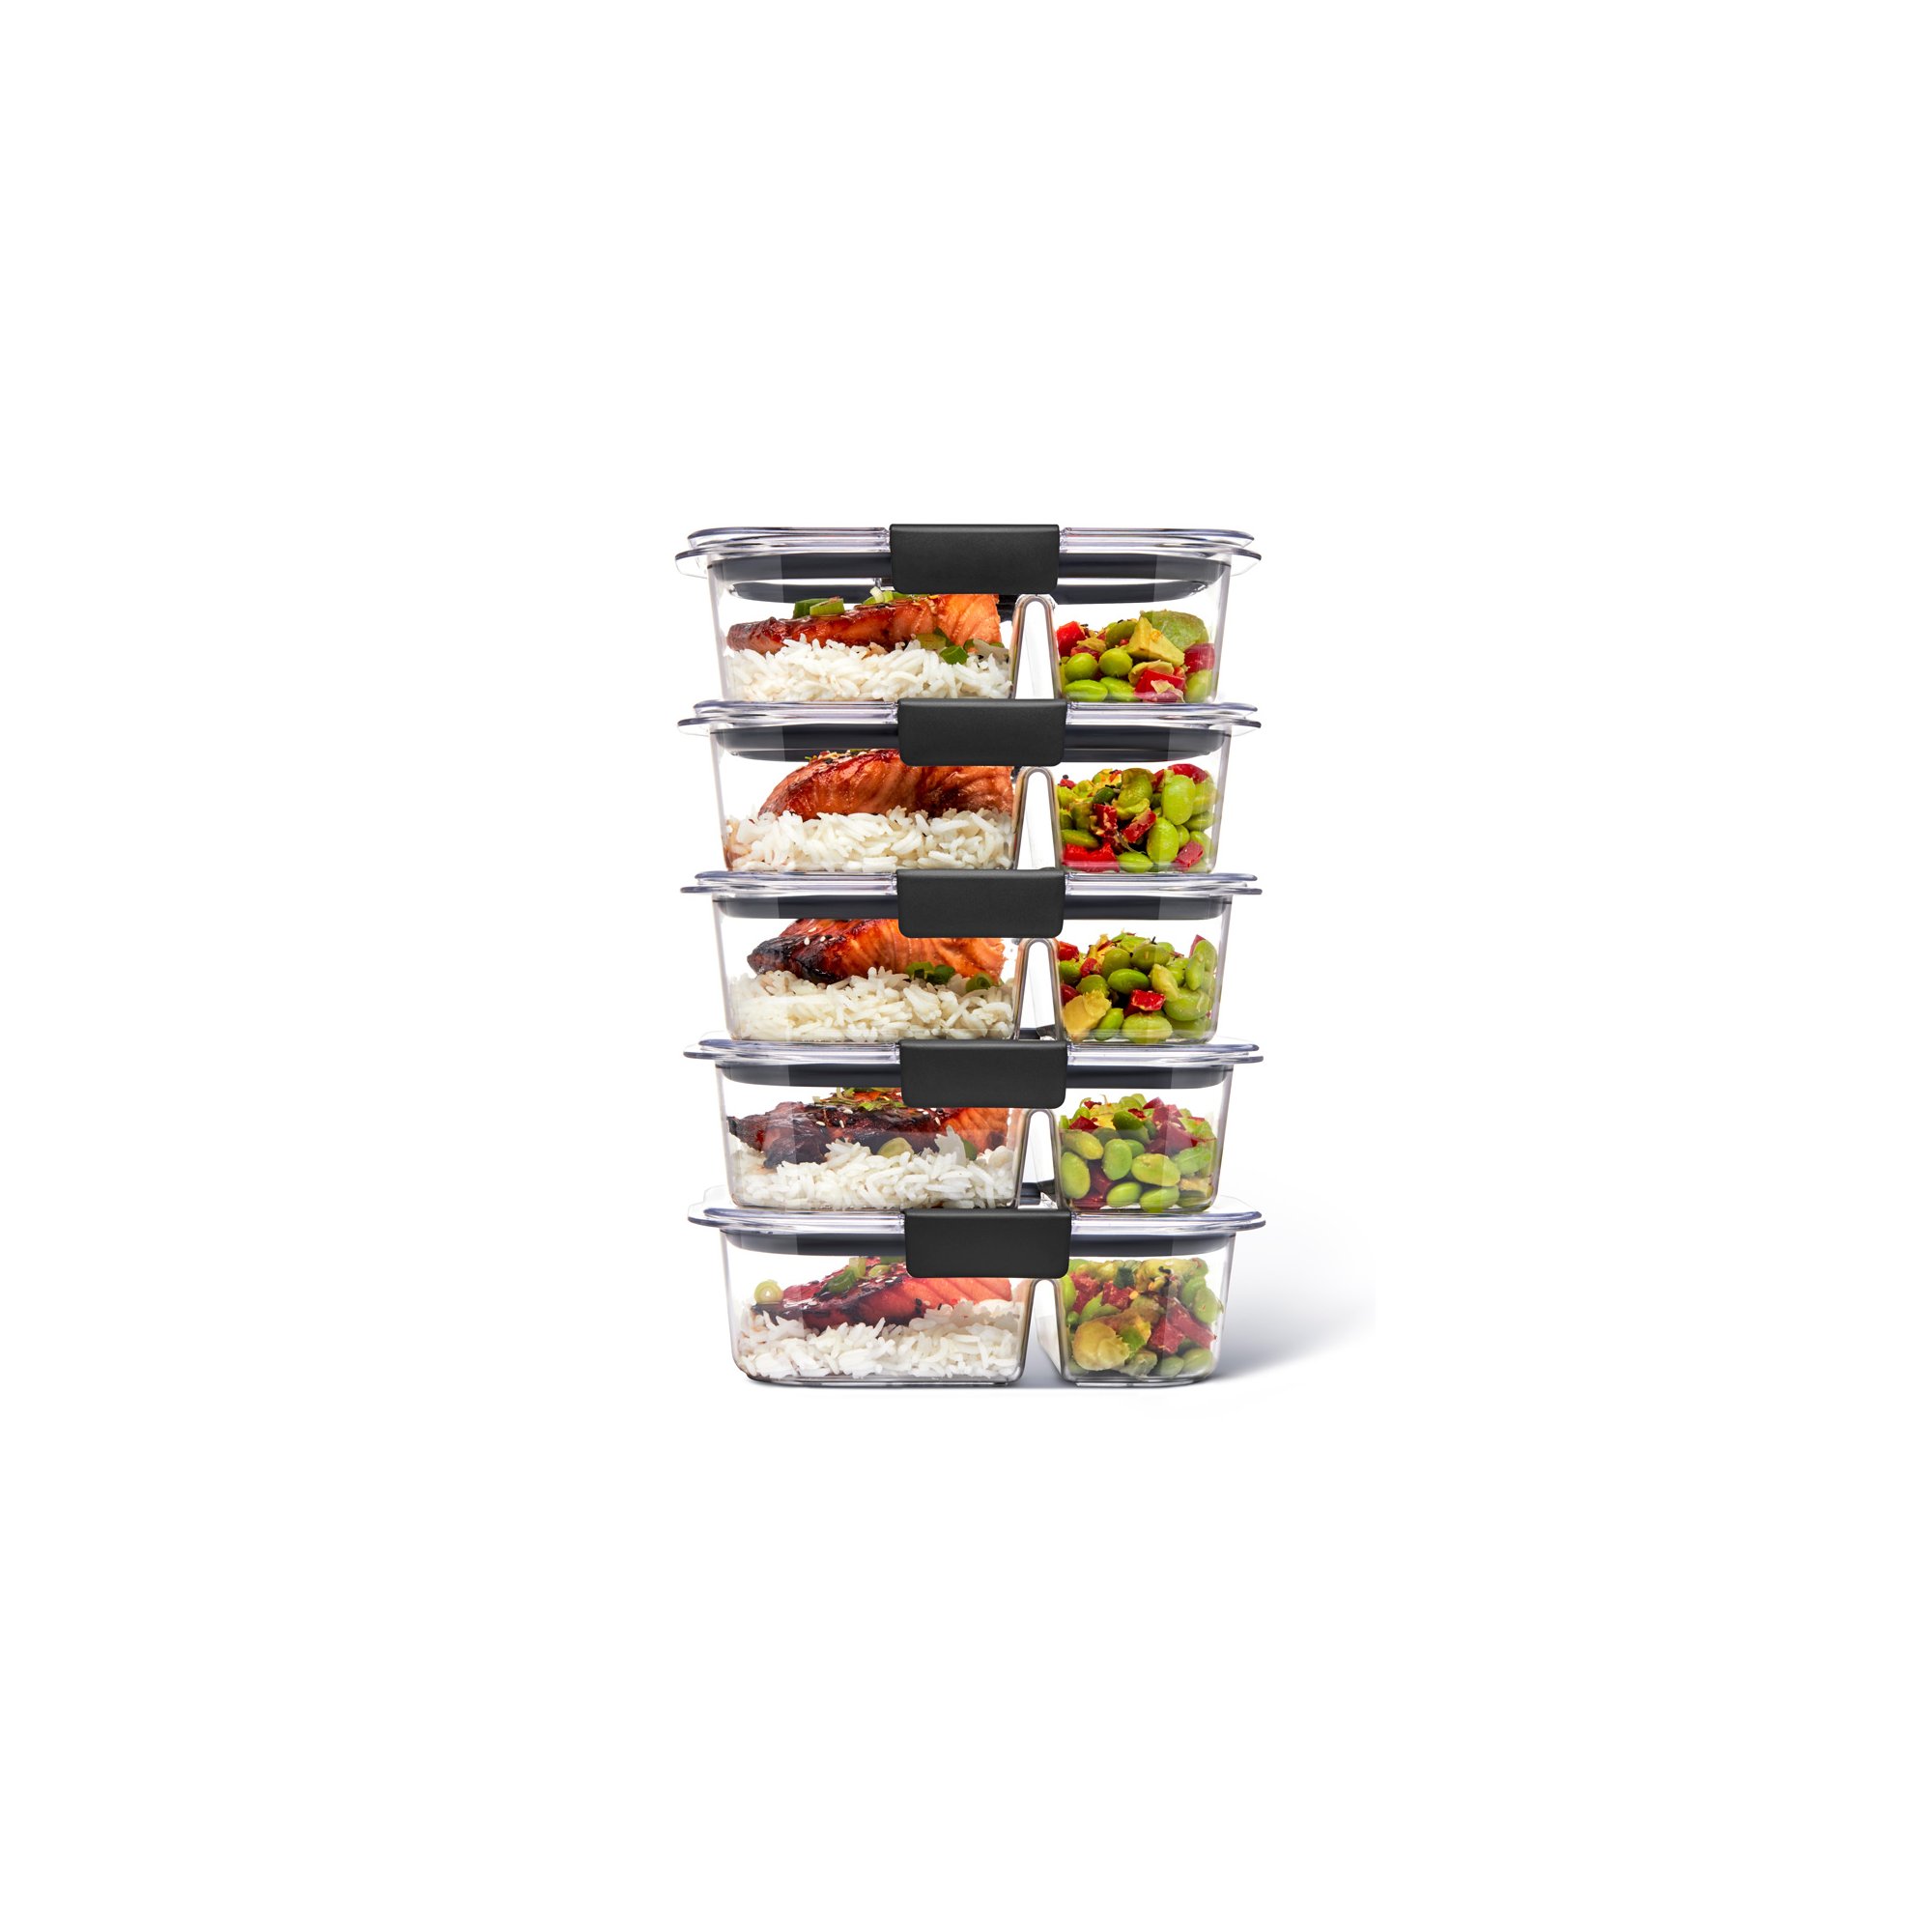 Rubbermaid® BRILLIANCE™ Containers Set the New Standard in Food